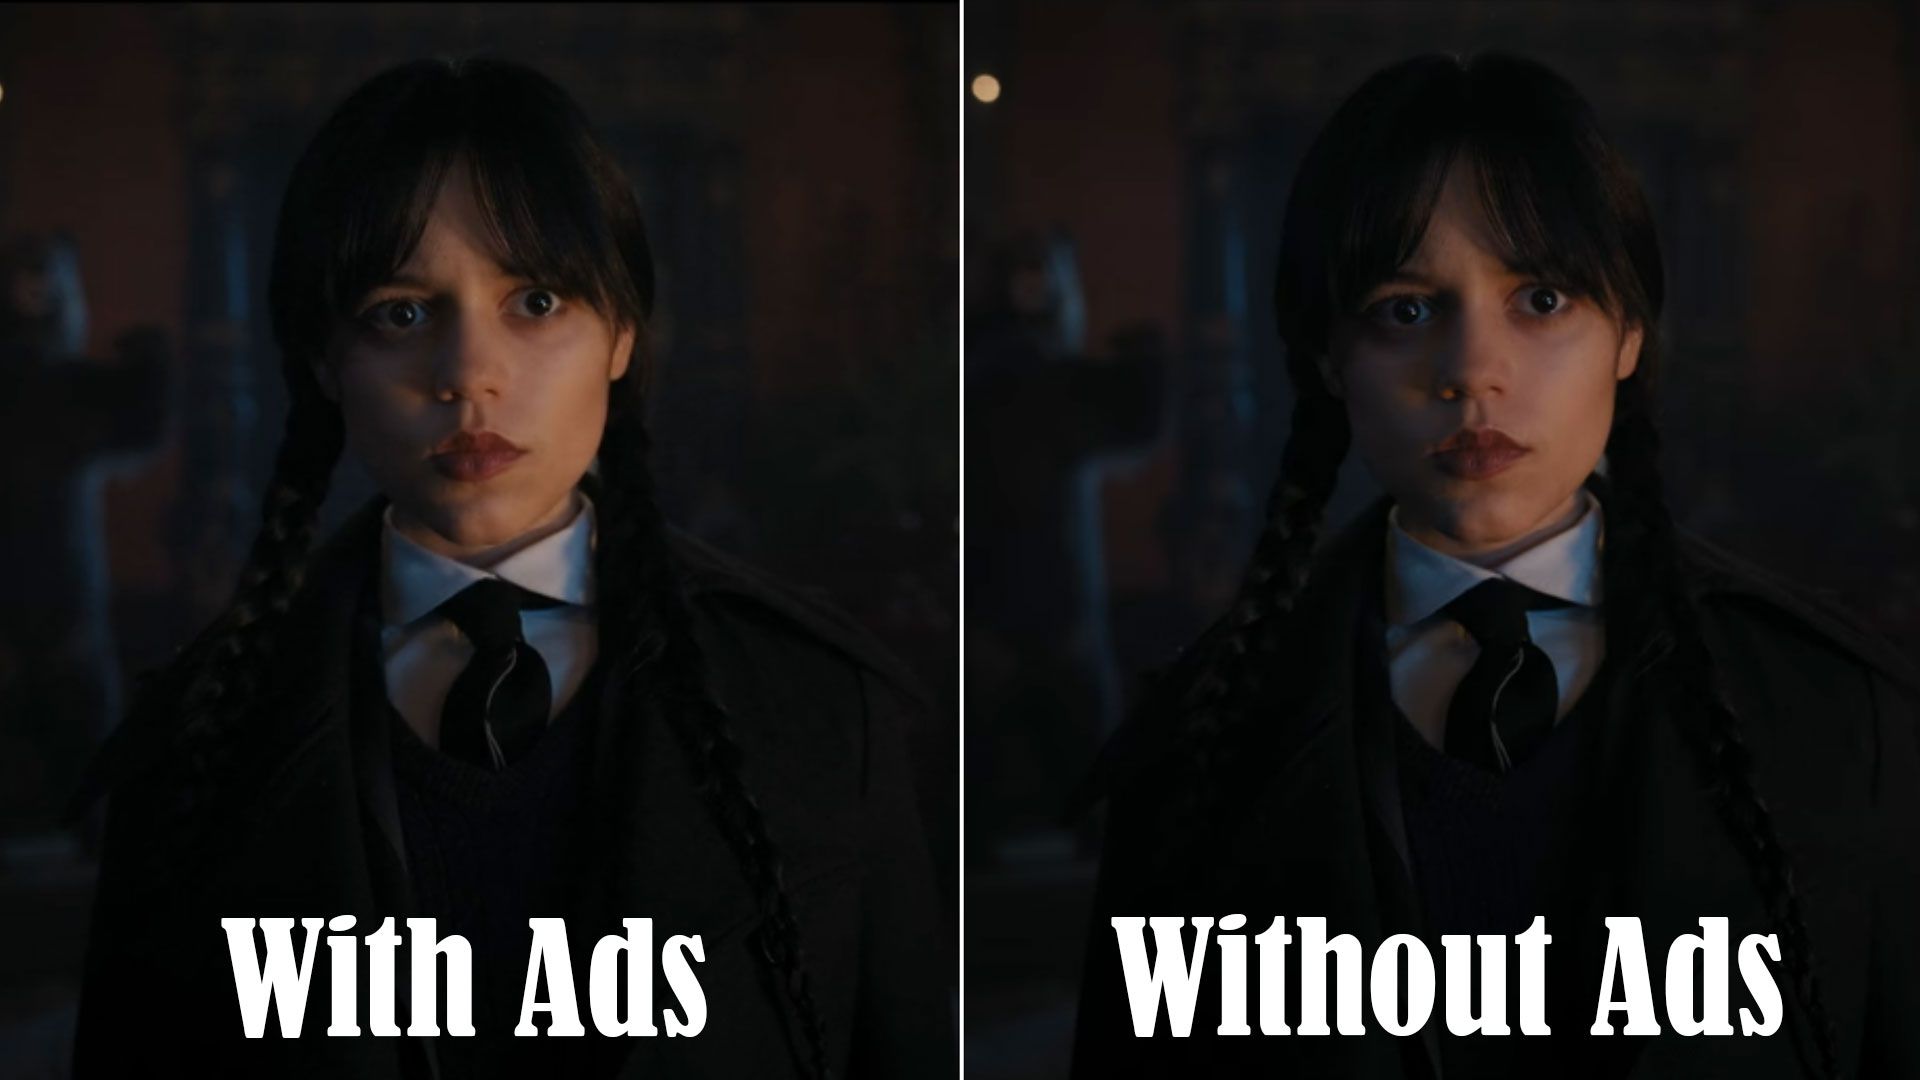 Image comparison using Wednesday, showing the with ads basic plan against the without ads premium plan